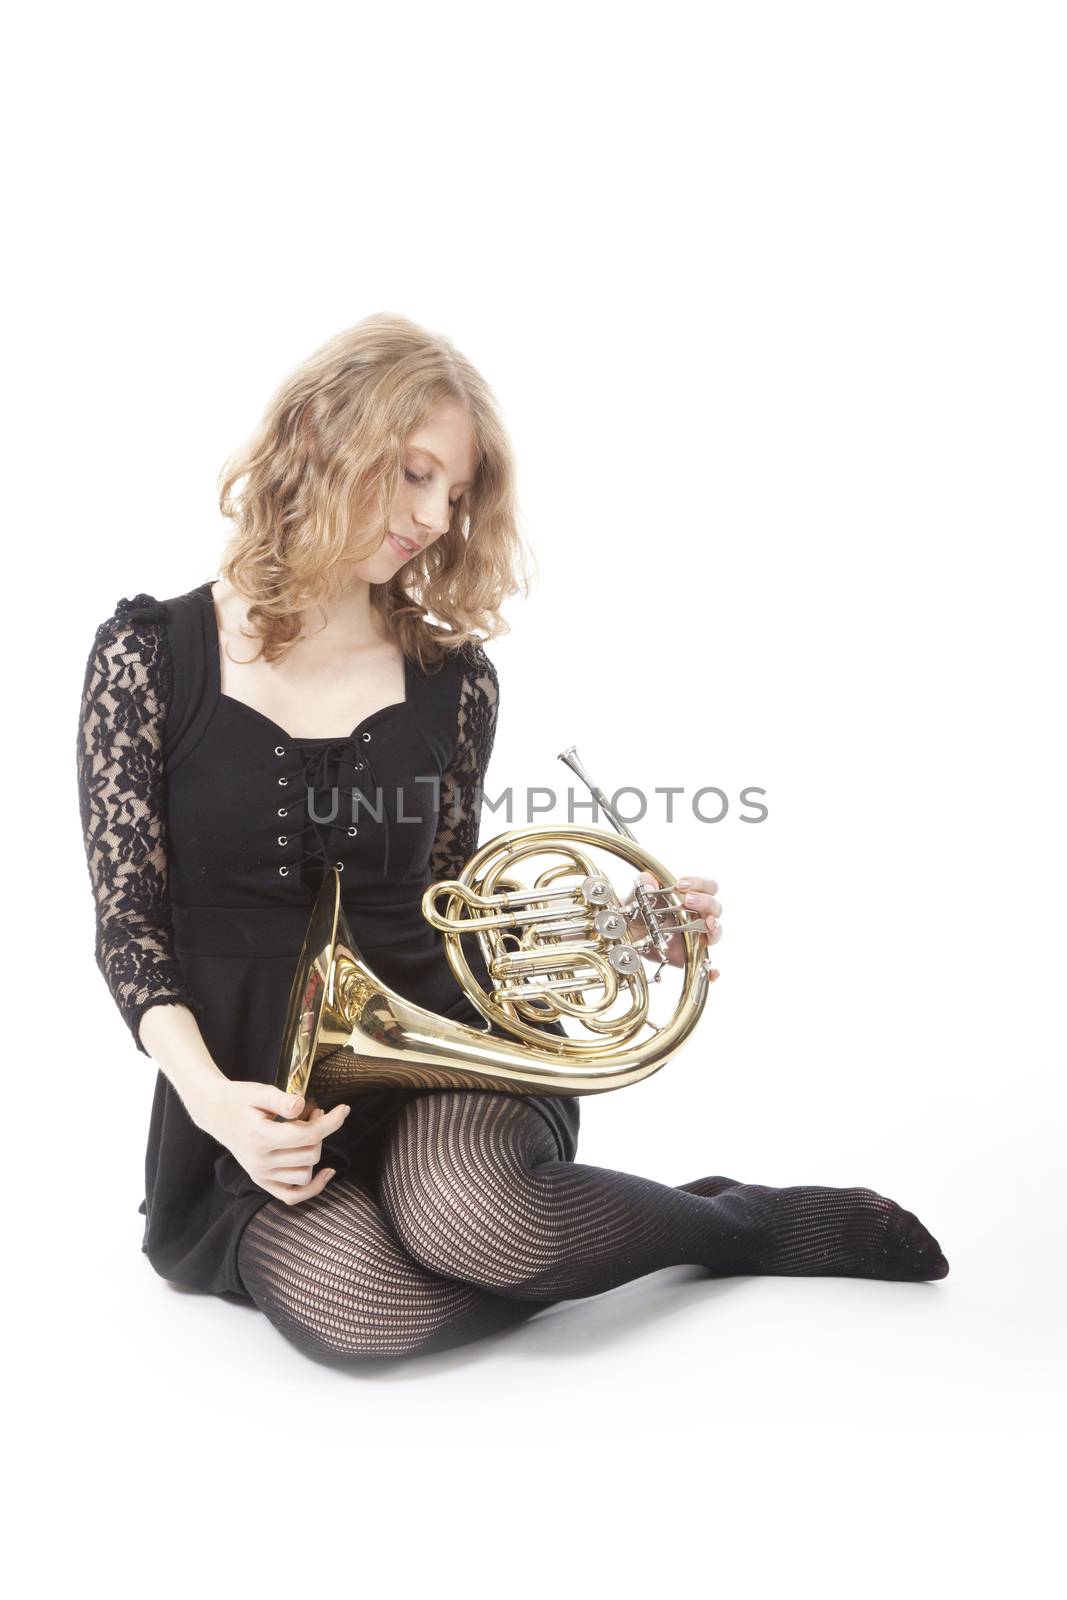 young pretty woman sitting and holding french horn against white background